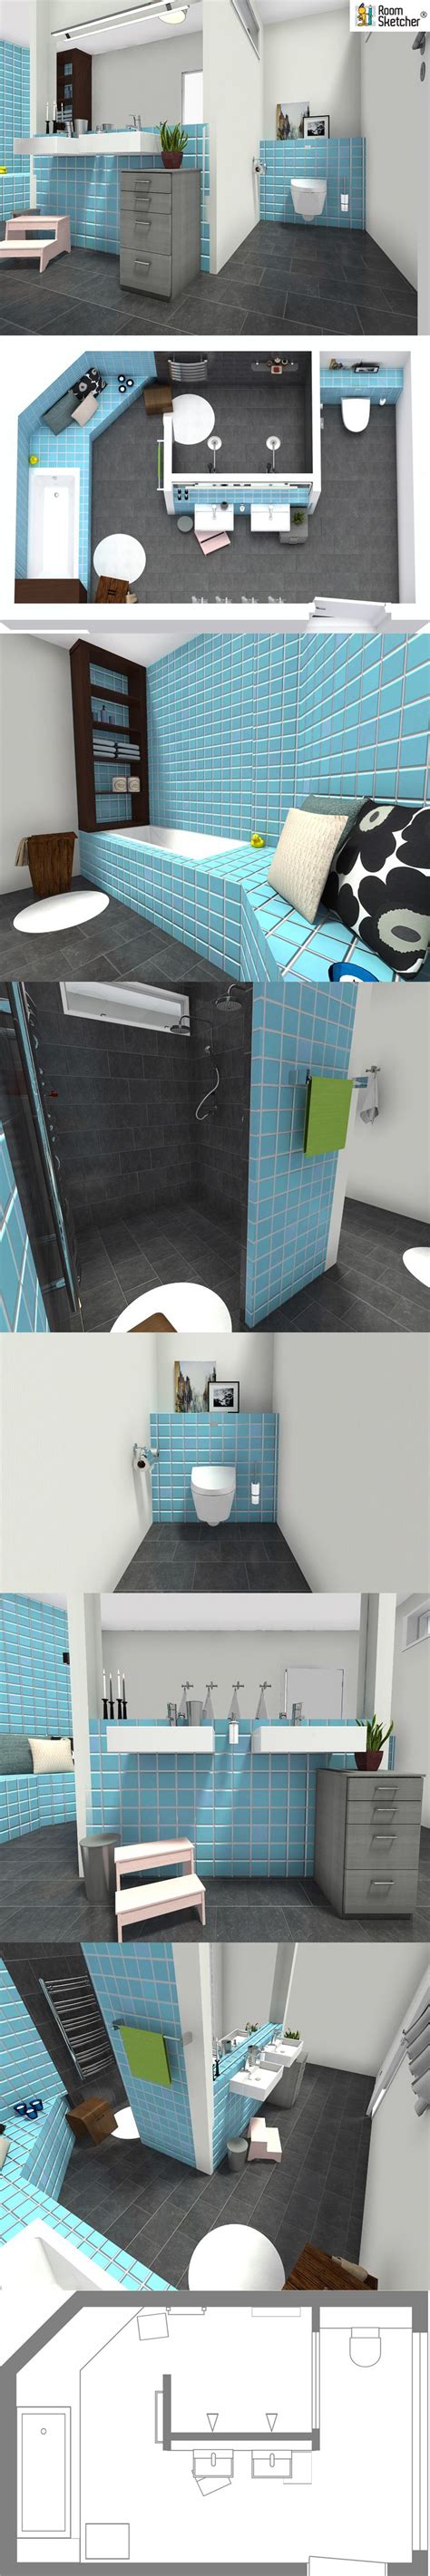 RoomSketcher Home Designer helps you plan your family bathroom. Try out ...